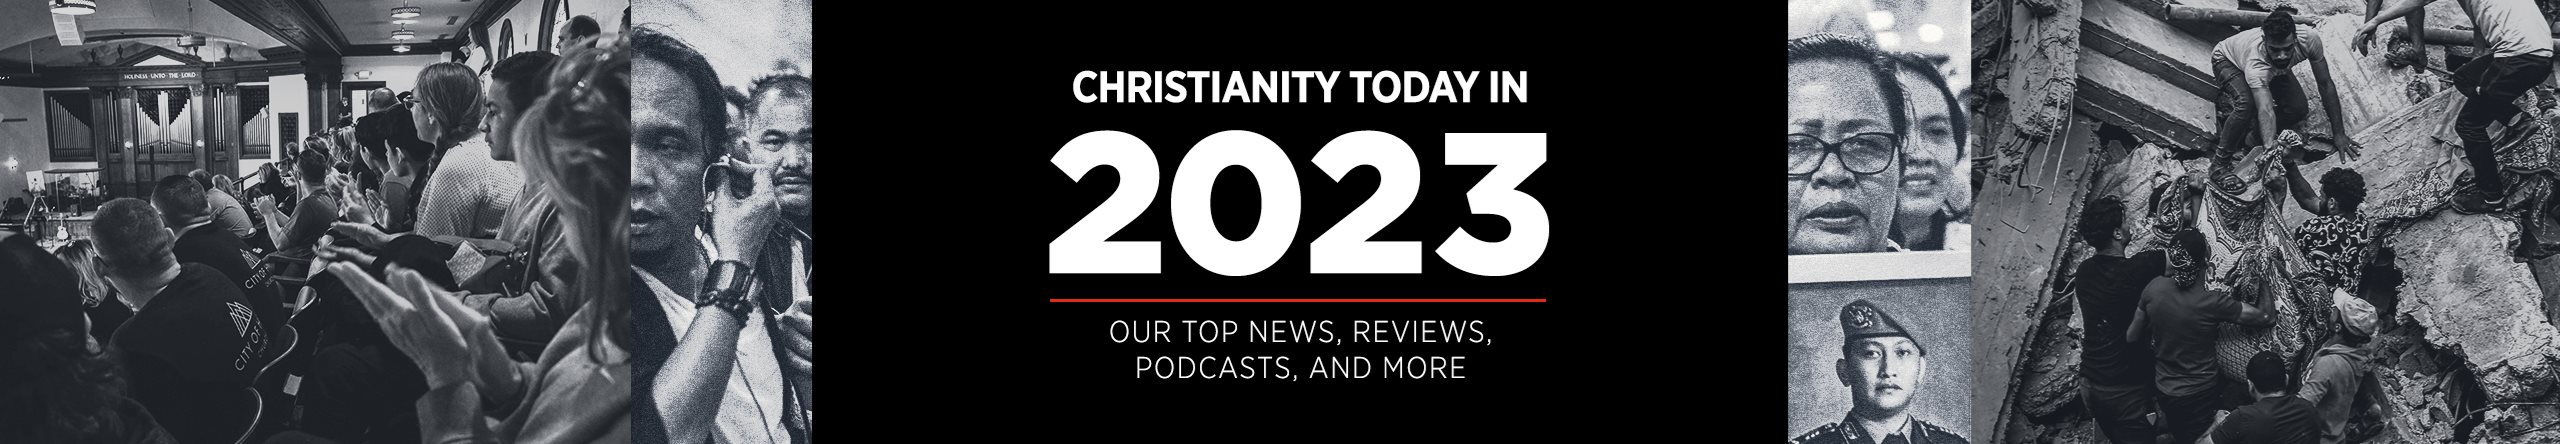 Christianity Today in 2023: Our Top News, Reviews, Podcasts, and More